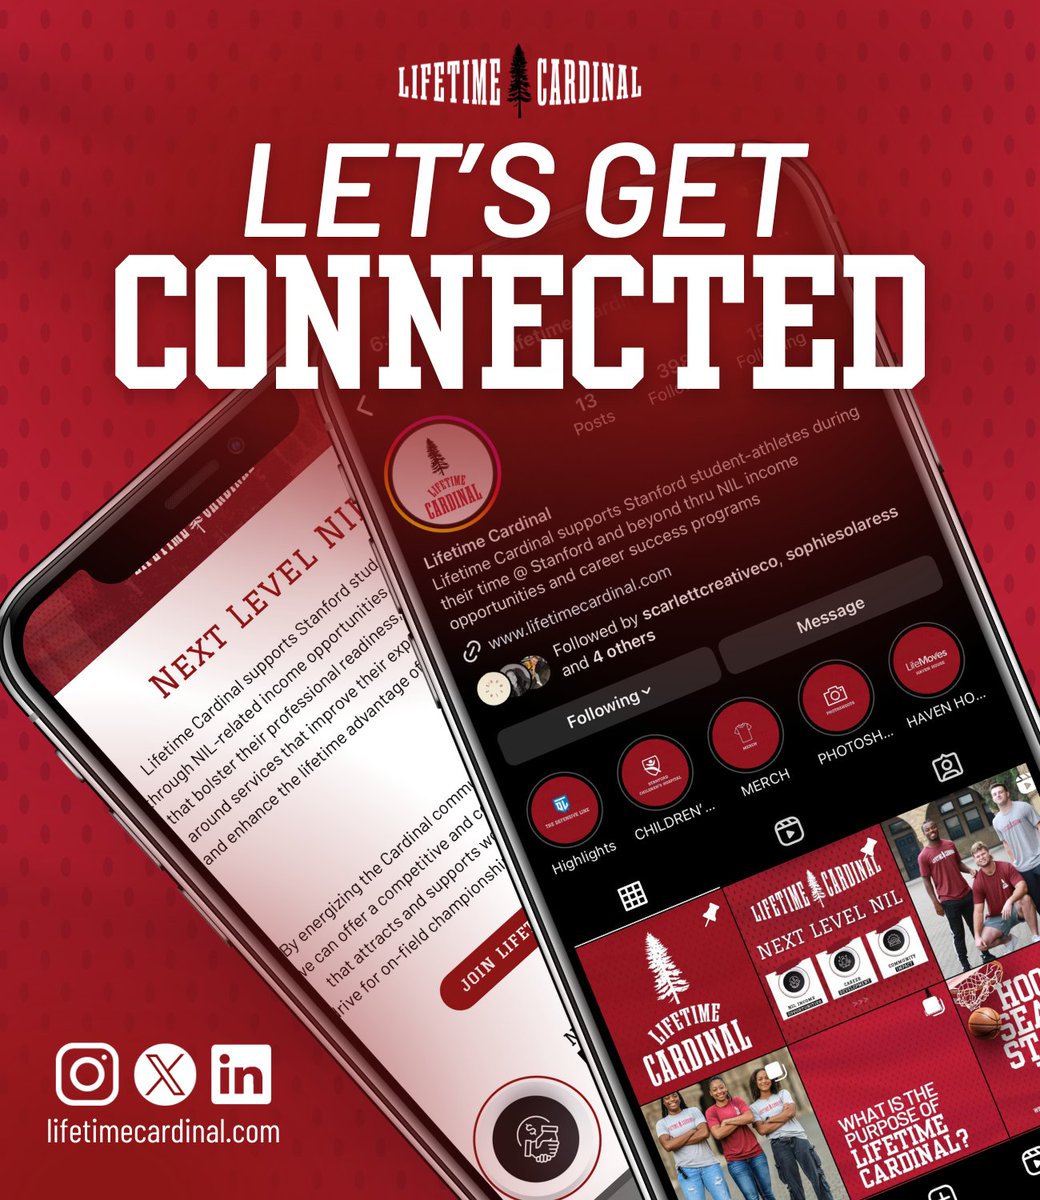 Join the movement! Follow Lifetime Cardinal to see what my teammates and I are up to and gain elite-level insight into the new landscape of college athletics.